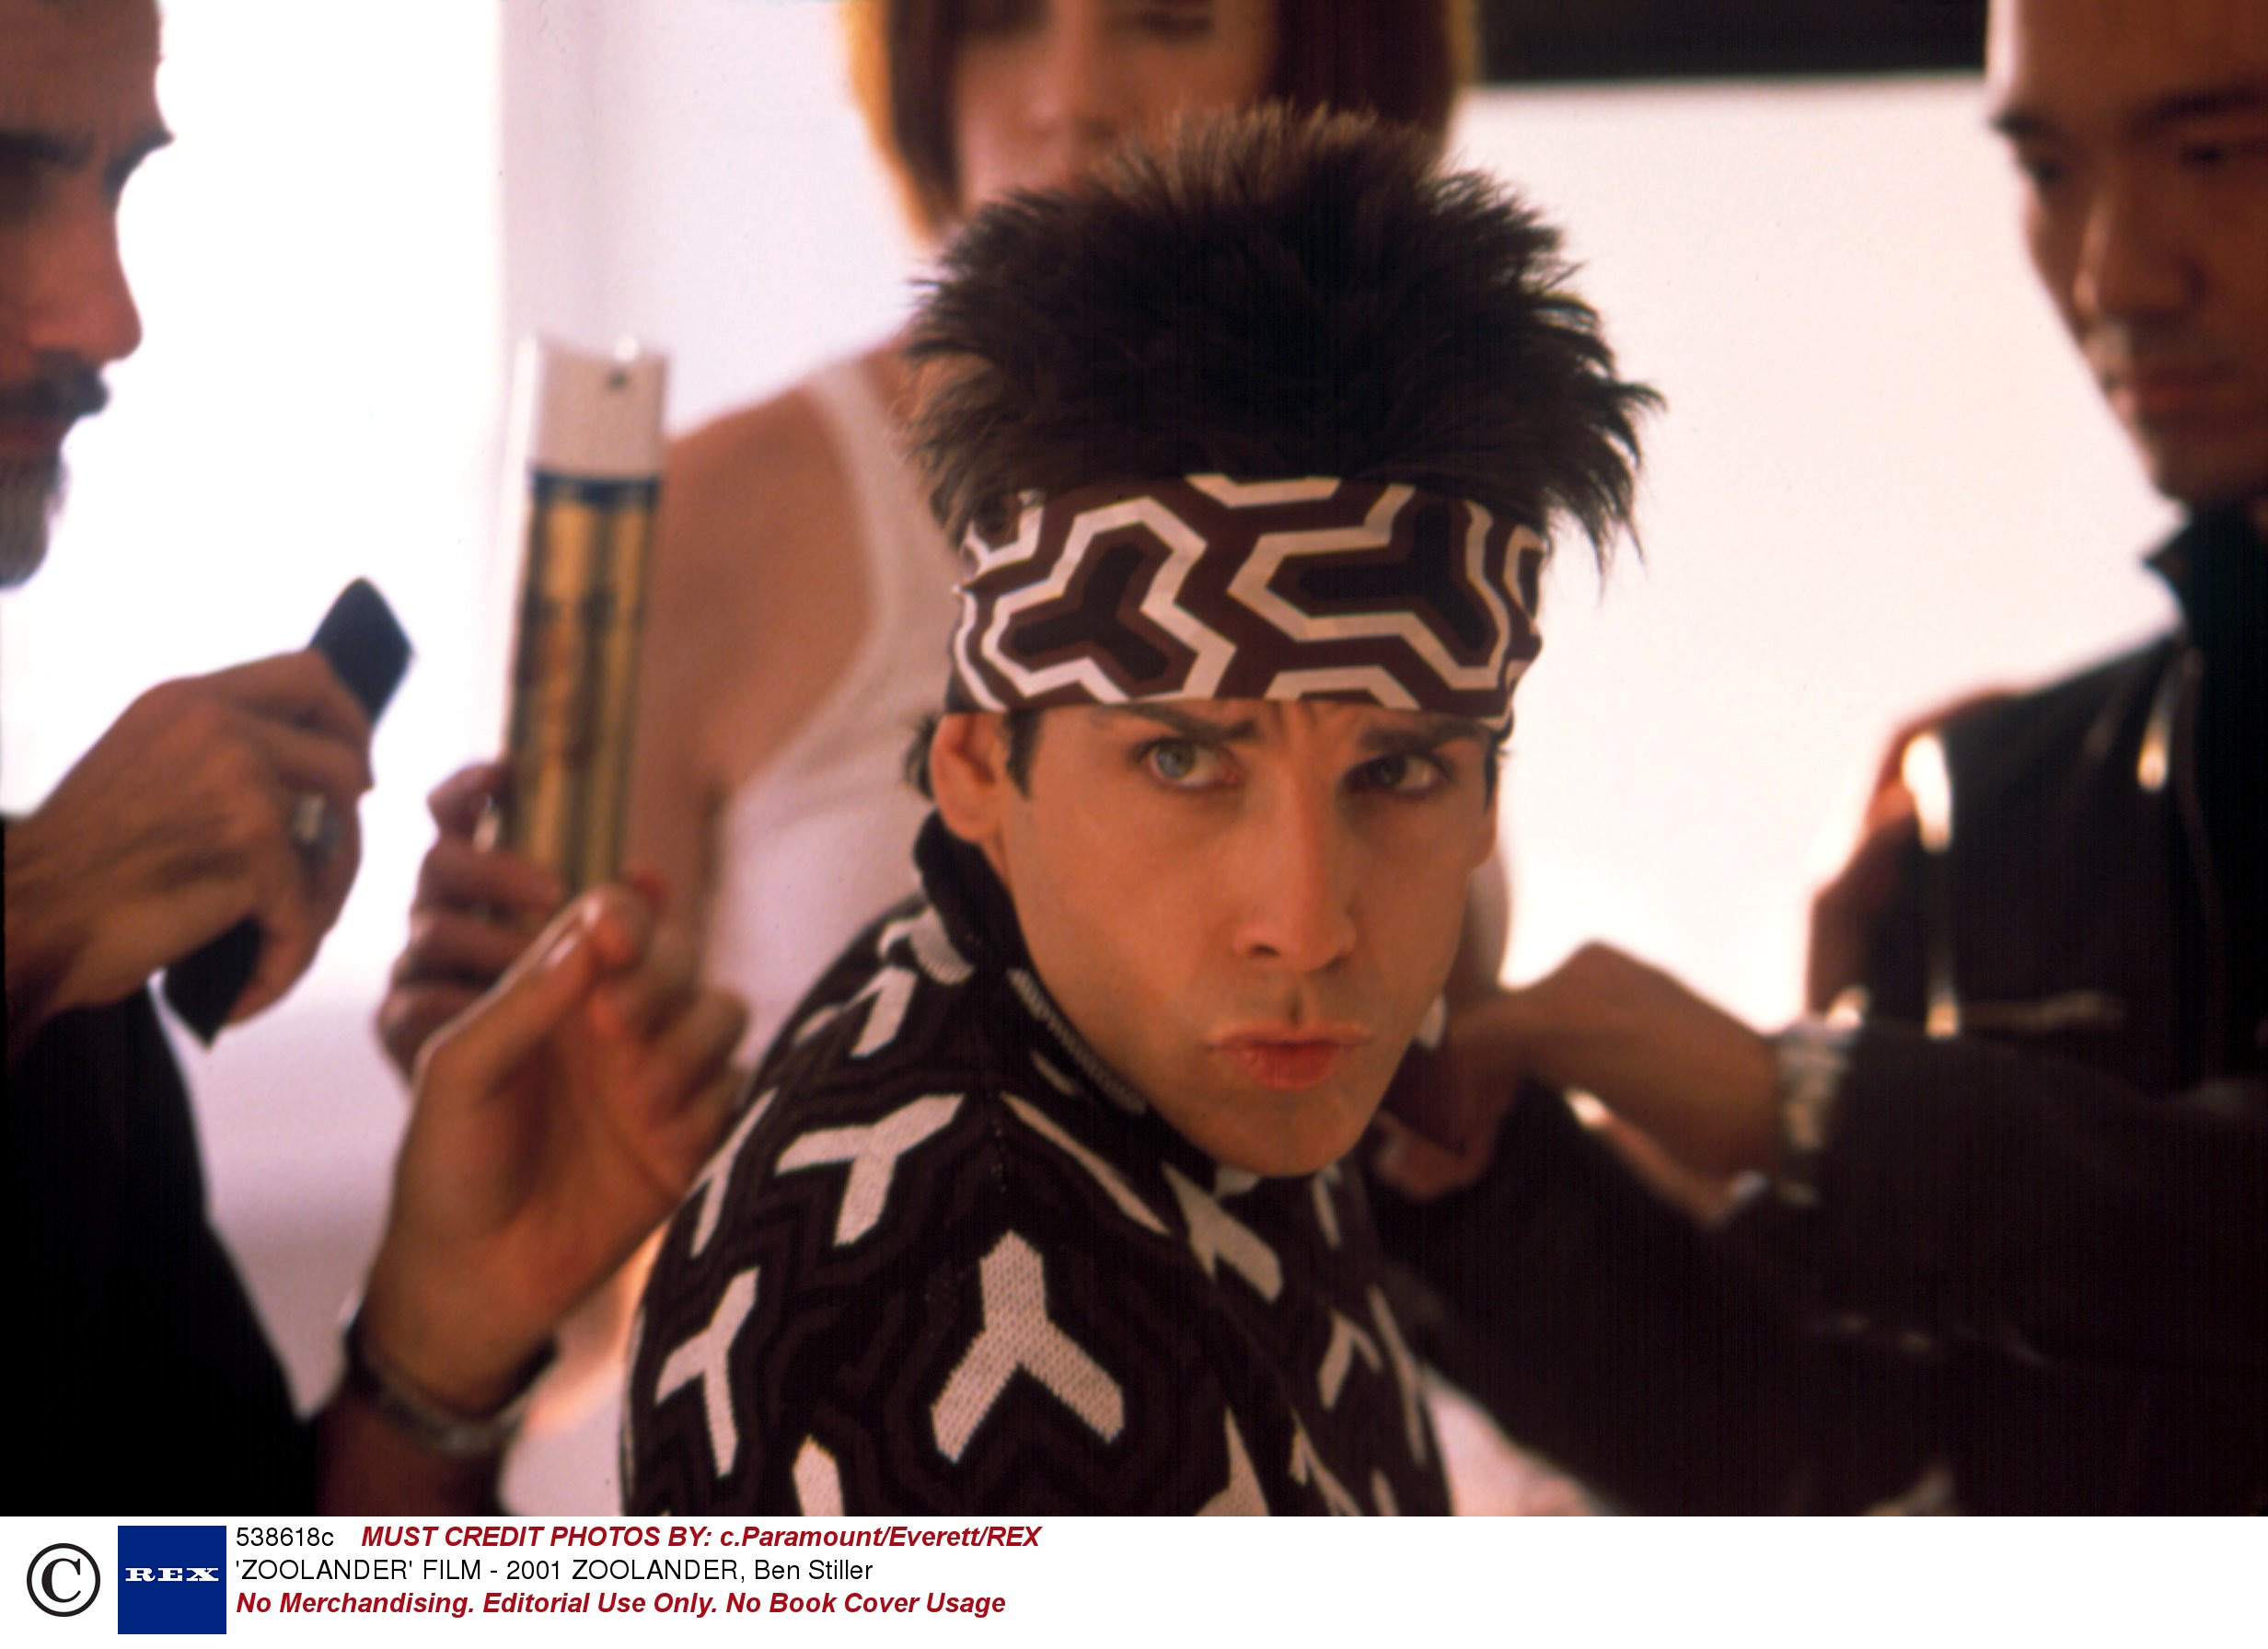 Funny Zoolander Quotes
 Zoolander 2 is happening Here are the 10 funniest Derek